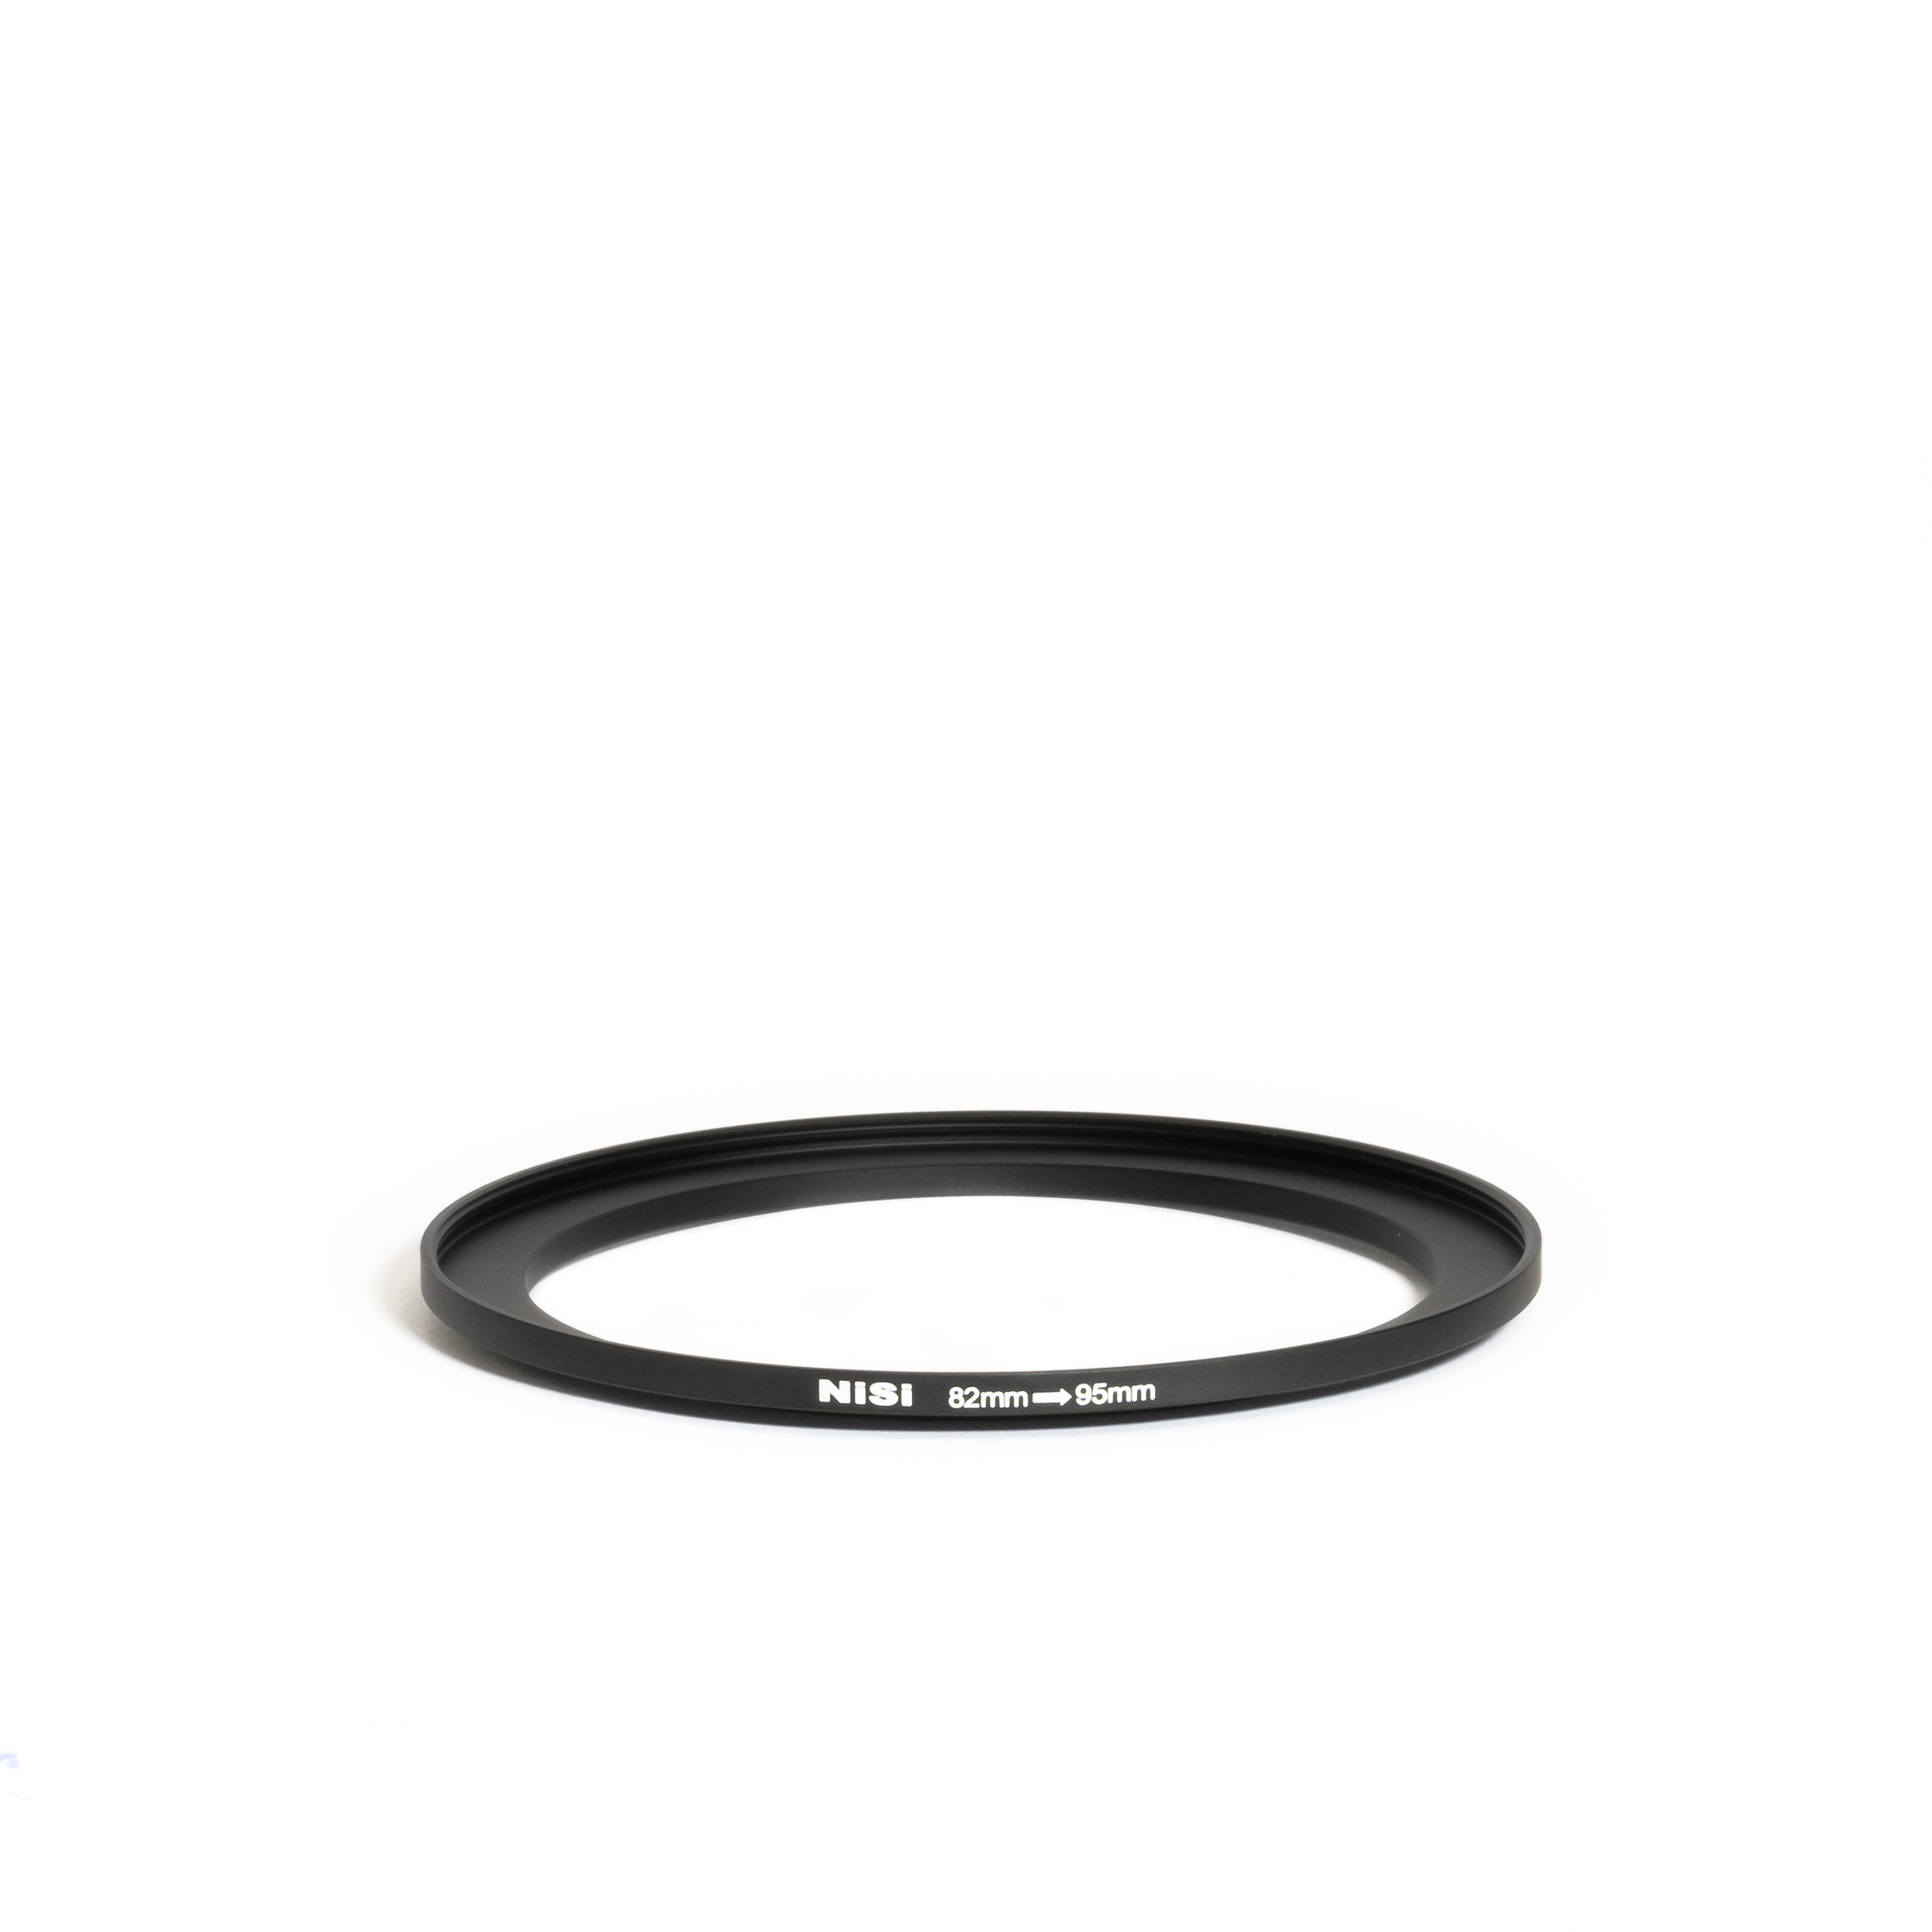 95 mm Filter Adapter Step-Up Adapter Filter Adapter Step Up 82-95 82 mm